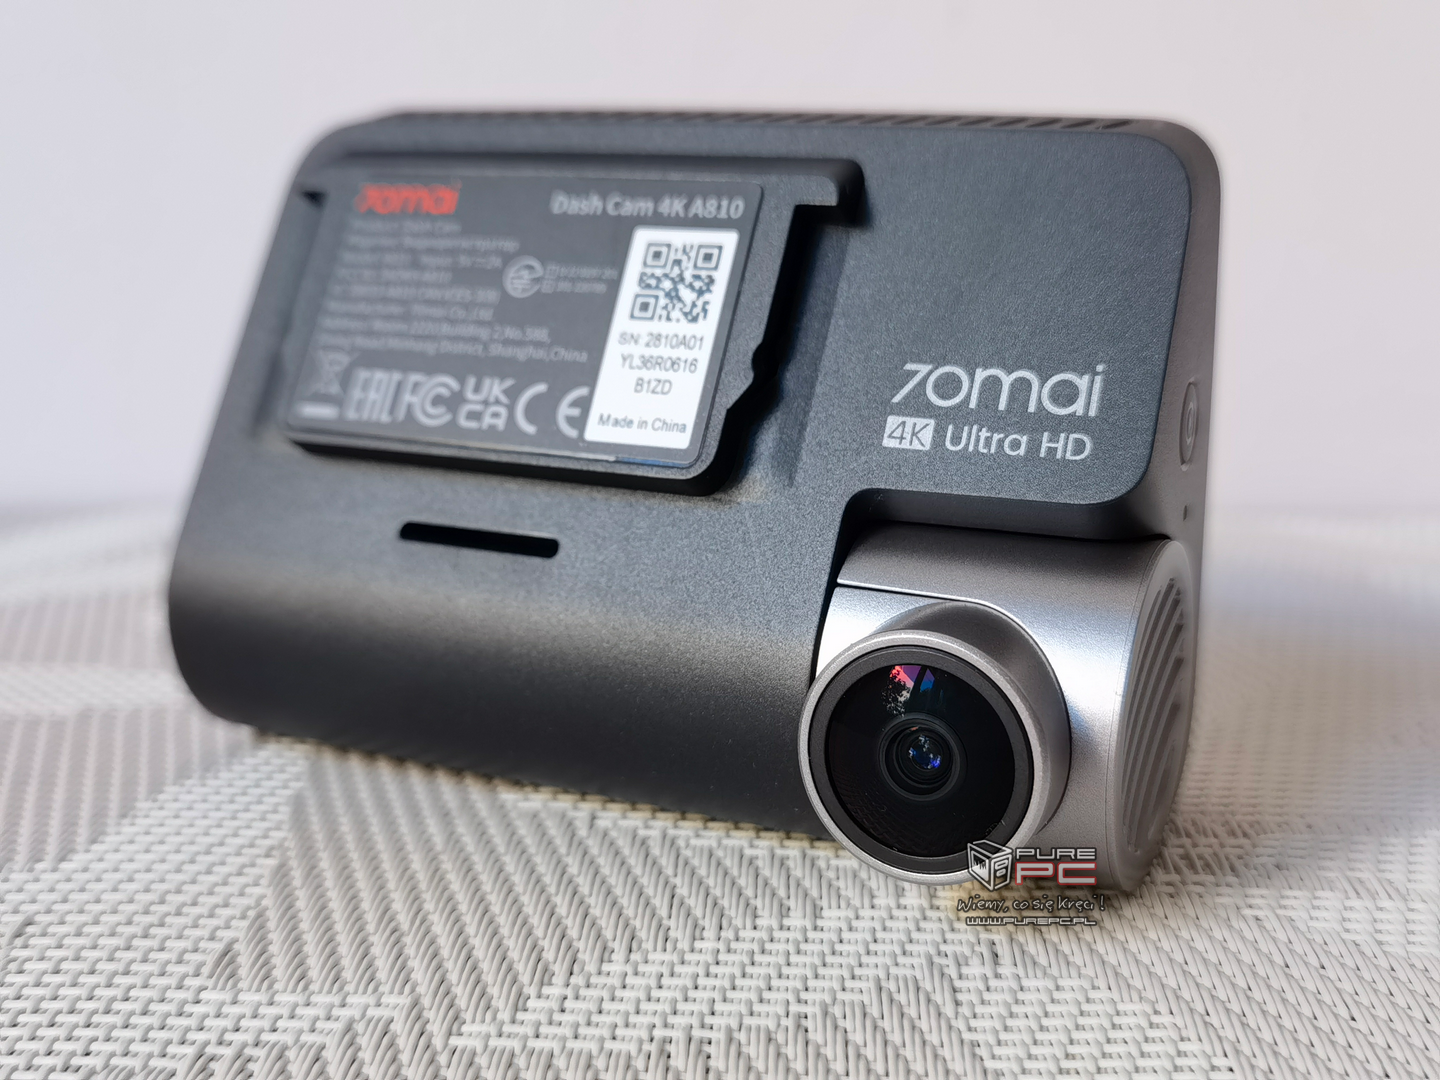  70mai New 4K Dash Cam A810 with Sony Starvis 2 IMX678